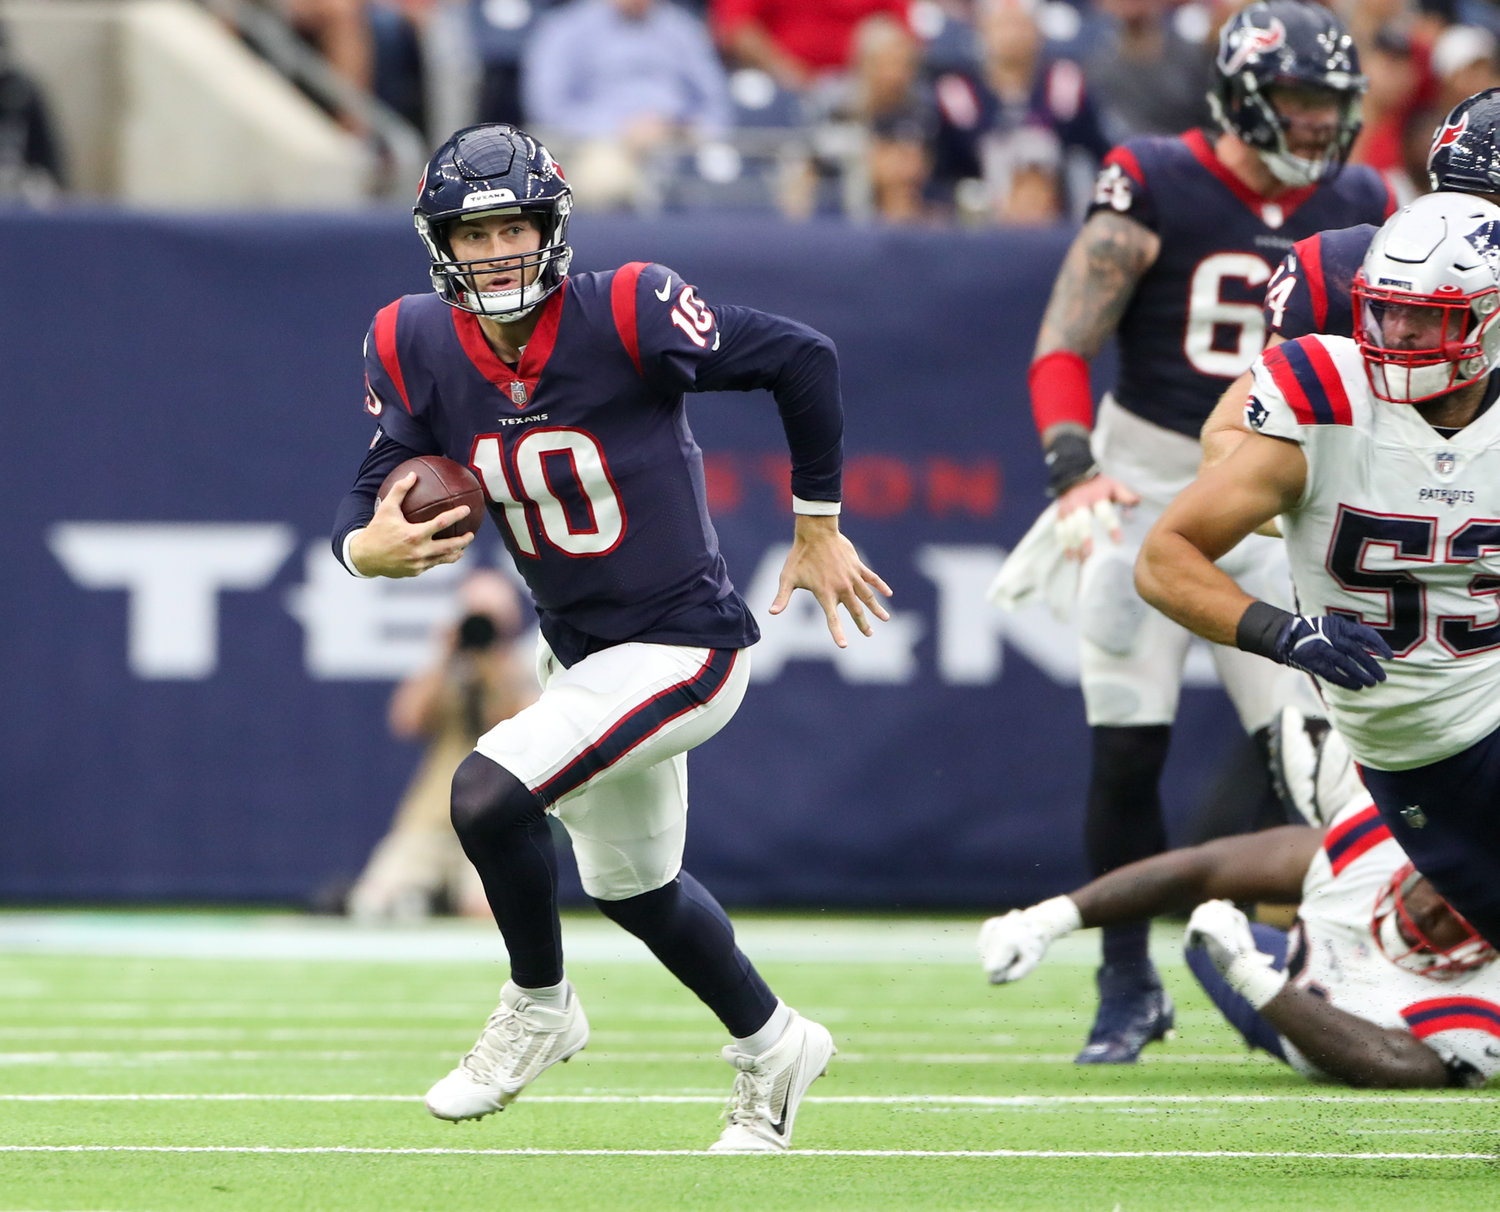 Houston Texans quarterback Davis Mills (10) scrambles out of the backfield during an NFL game between Houston and New England on October 10, 2021 in Houston, Texas. The Patriots won 25-22.